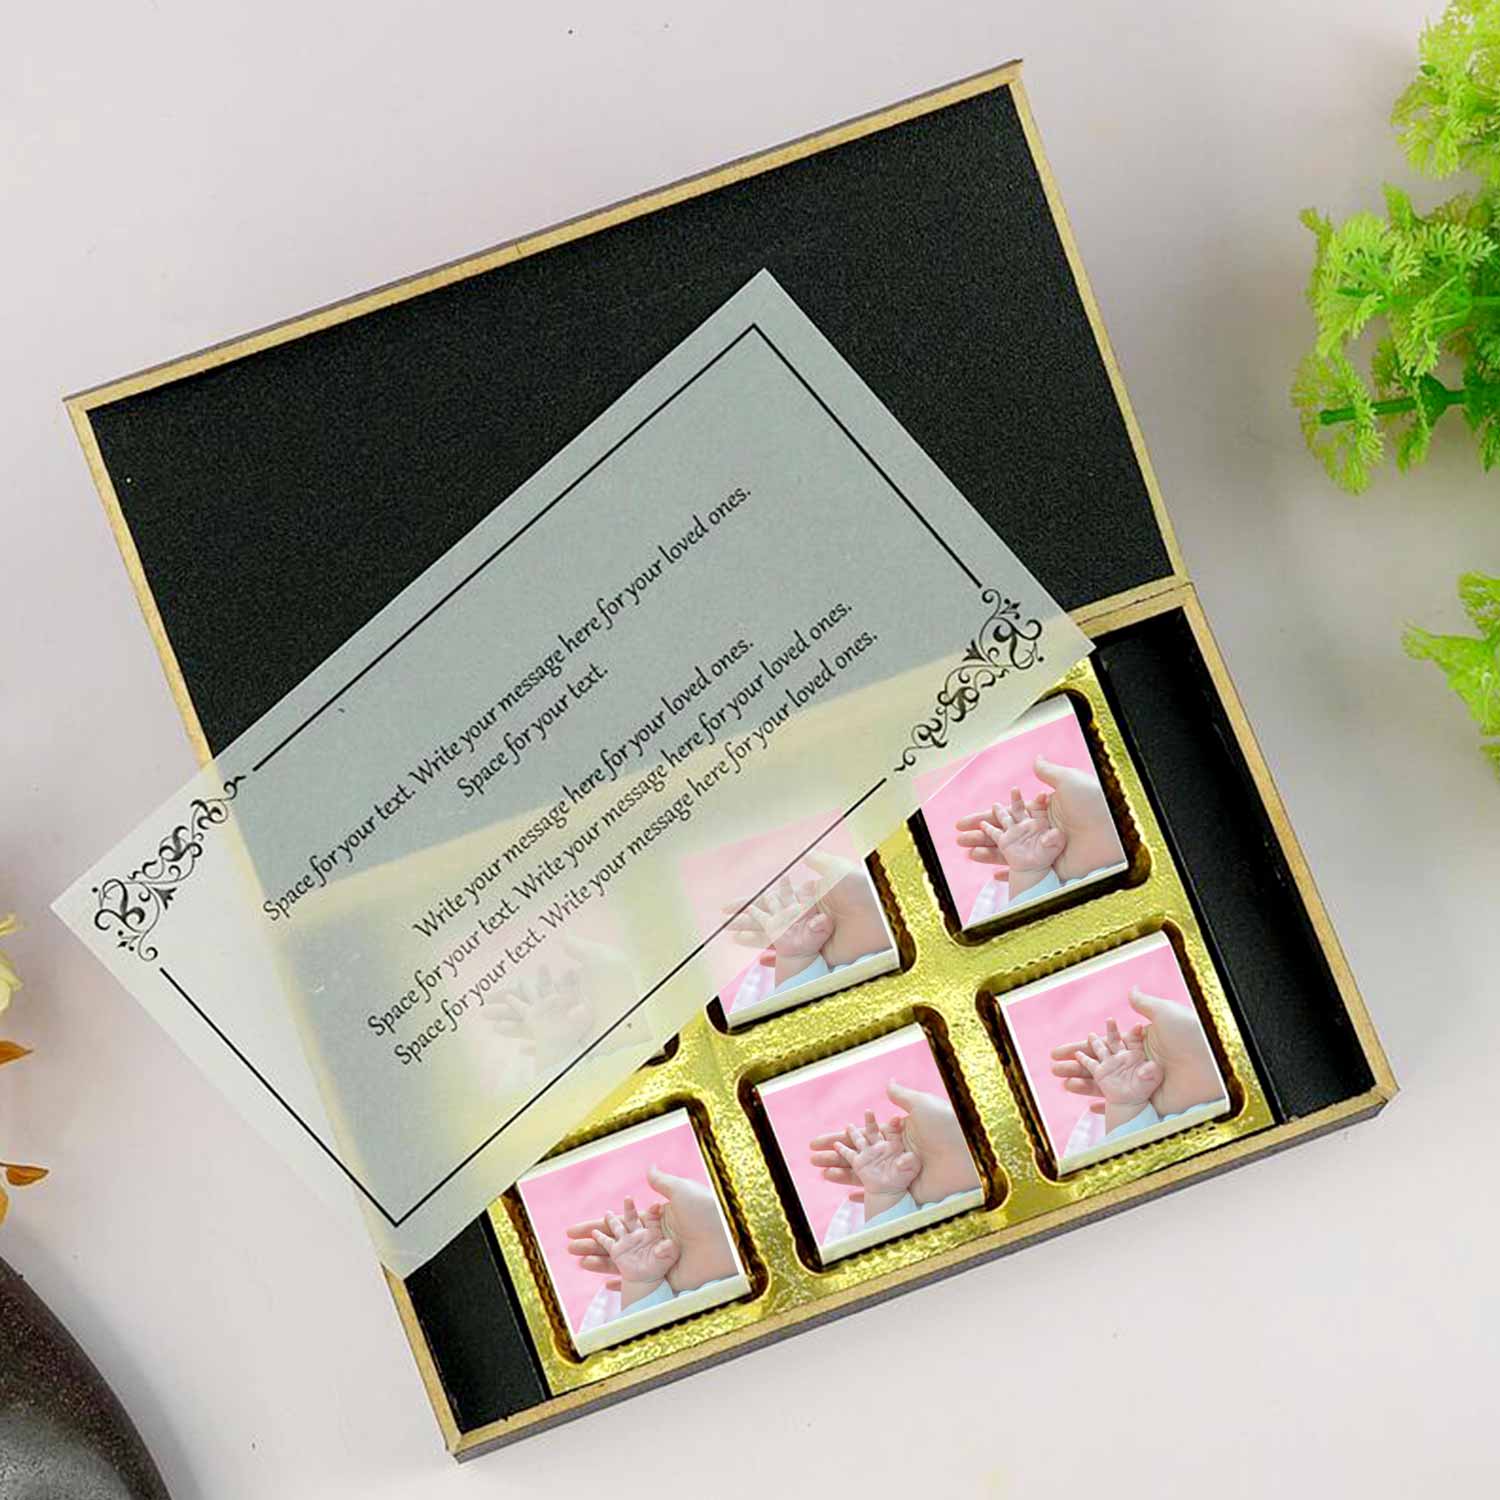 Customized black wooden box with all wrapper printed chocolates. There is also a personalized message printed on Message paper inside the box..